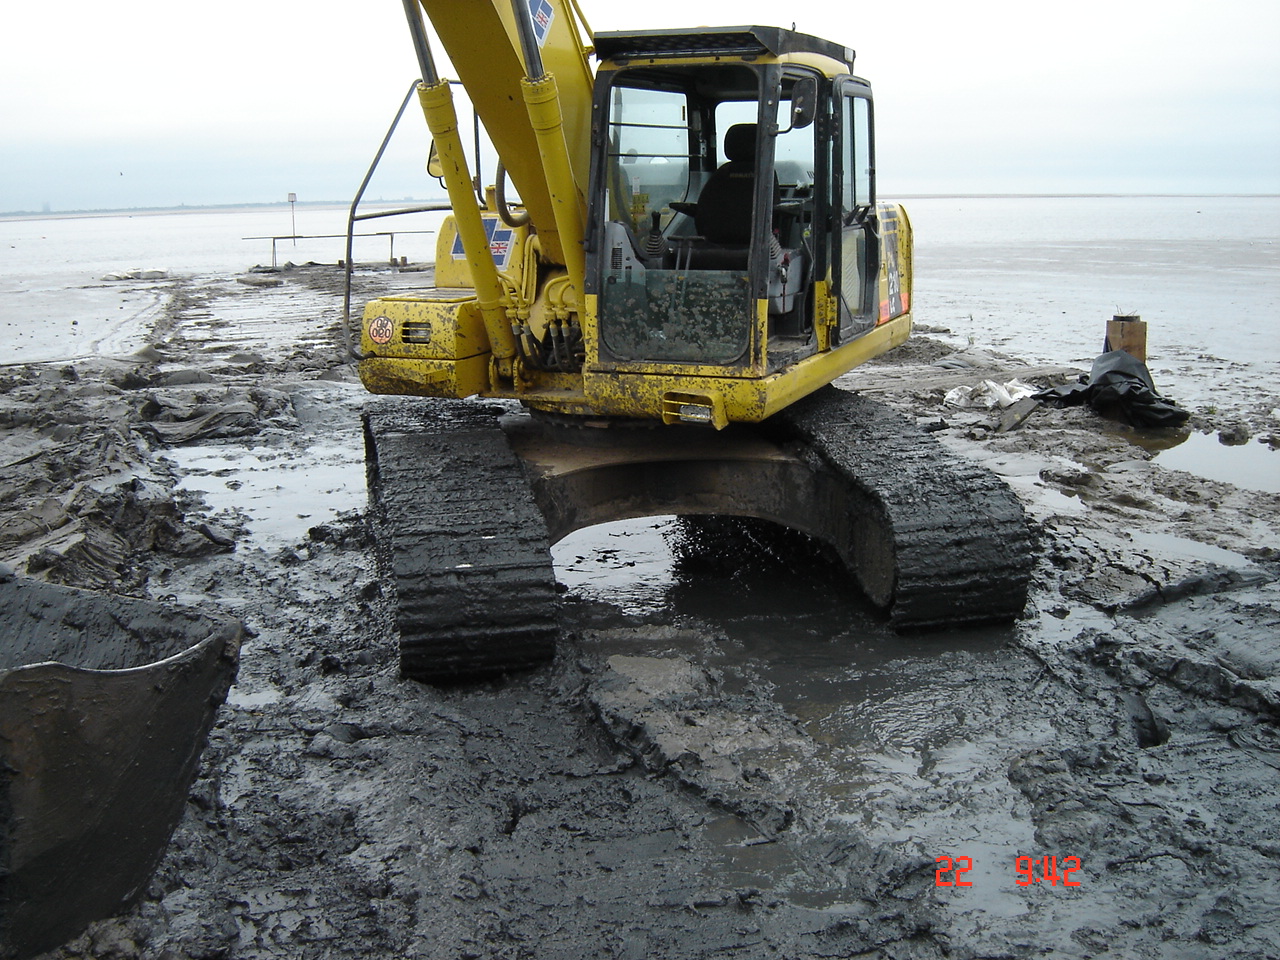 construction on muddy, unstable ground near a body of water